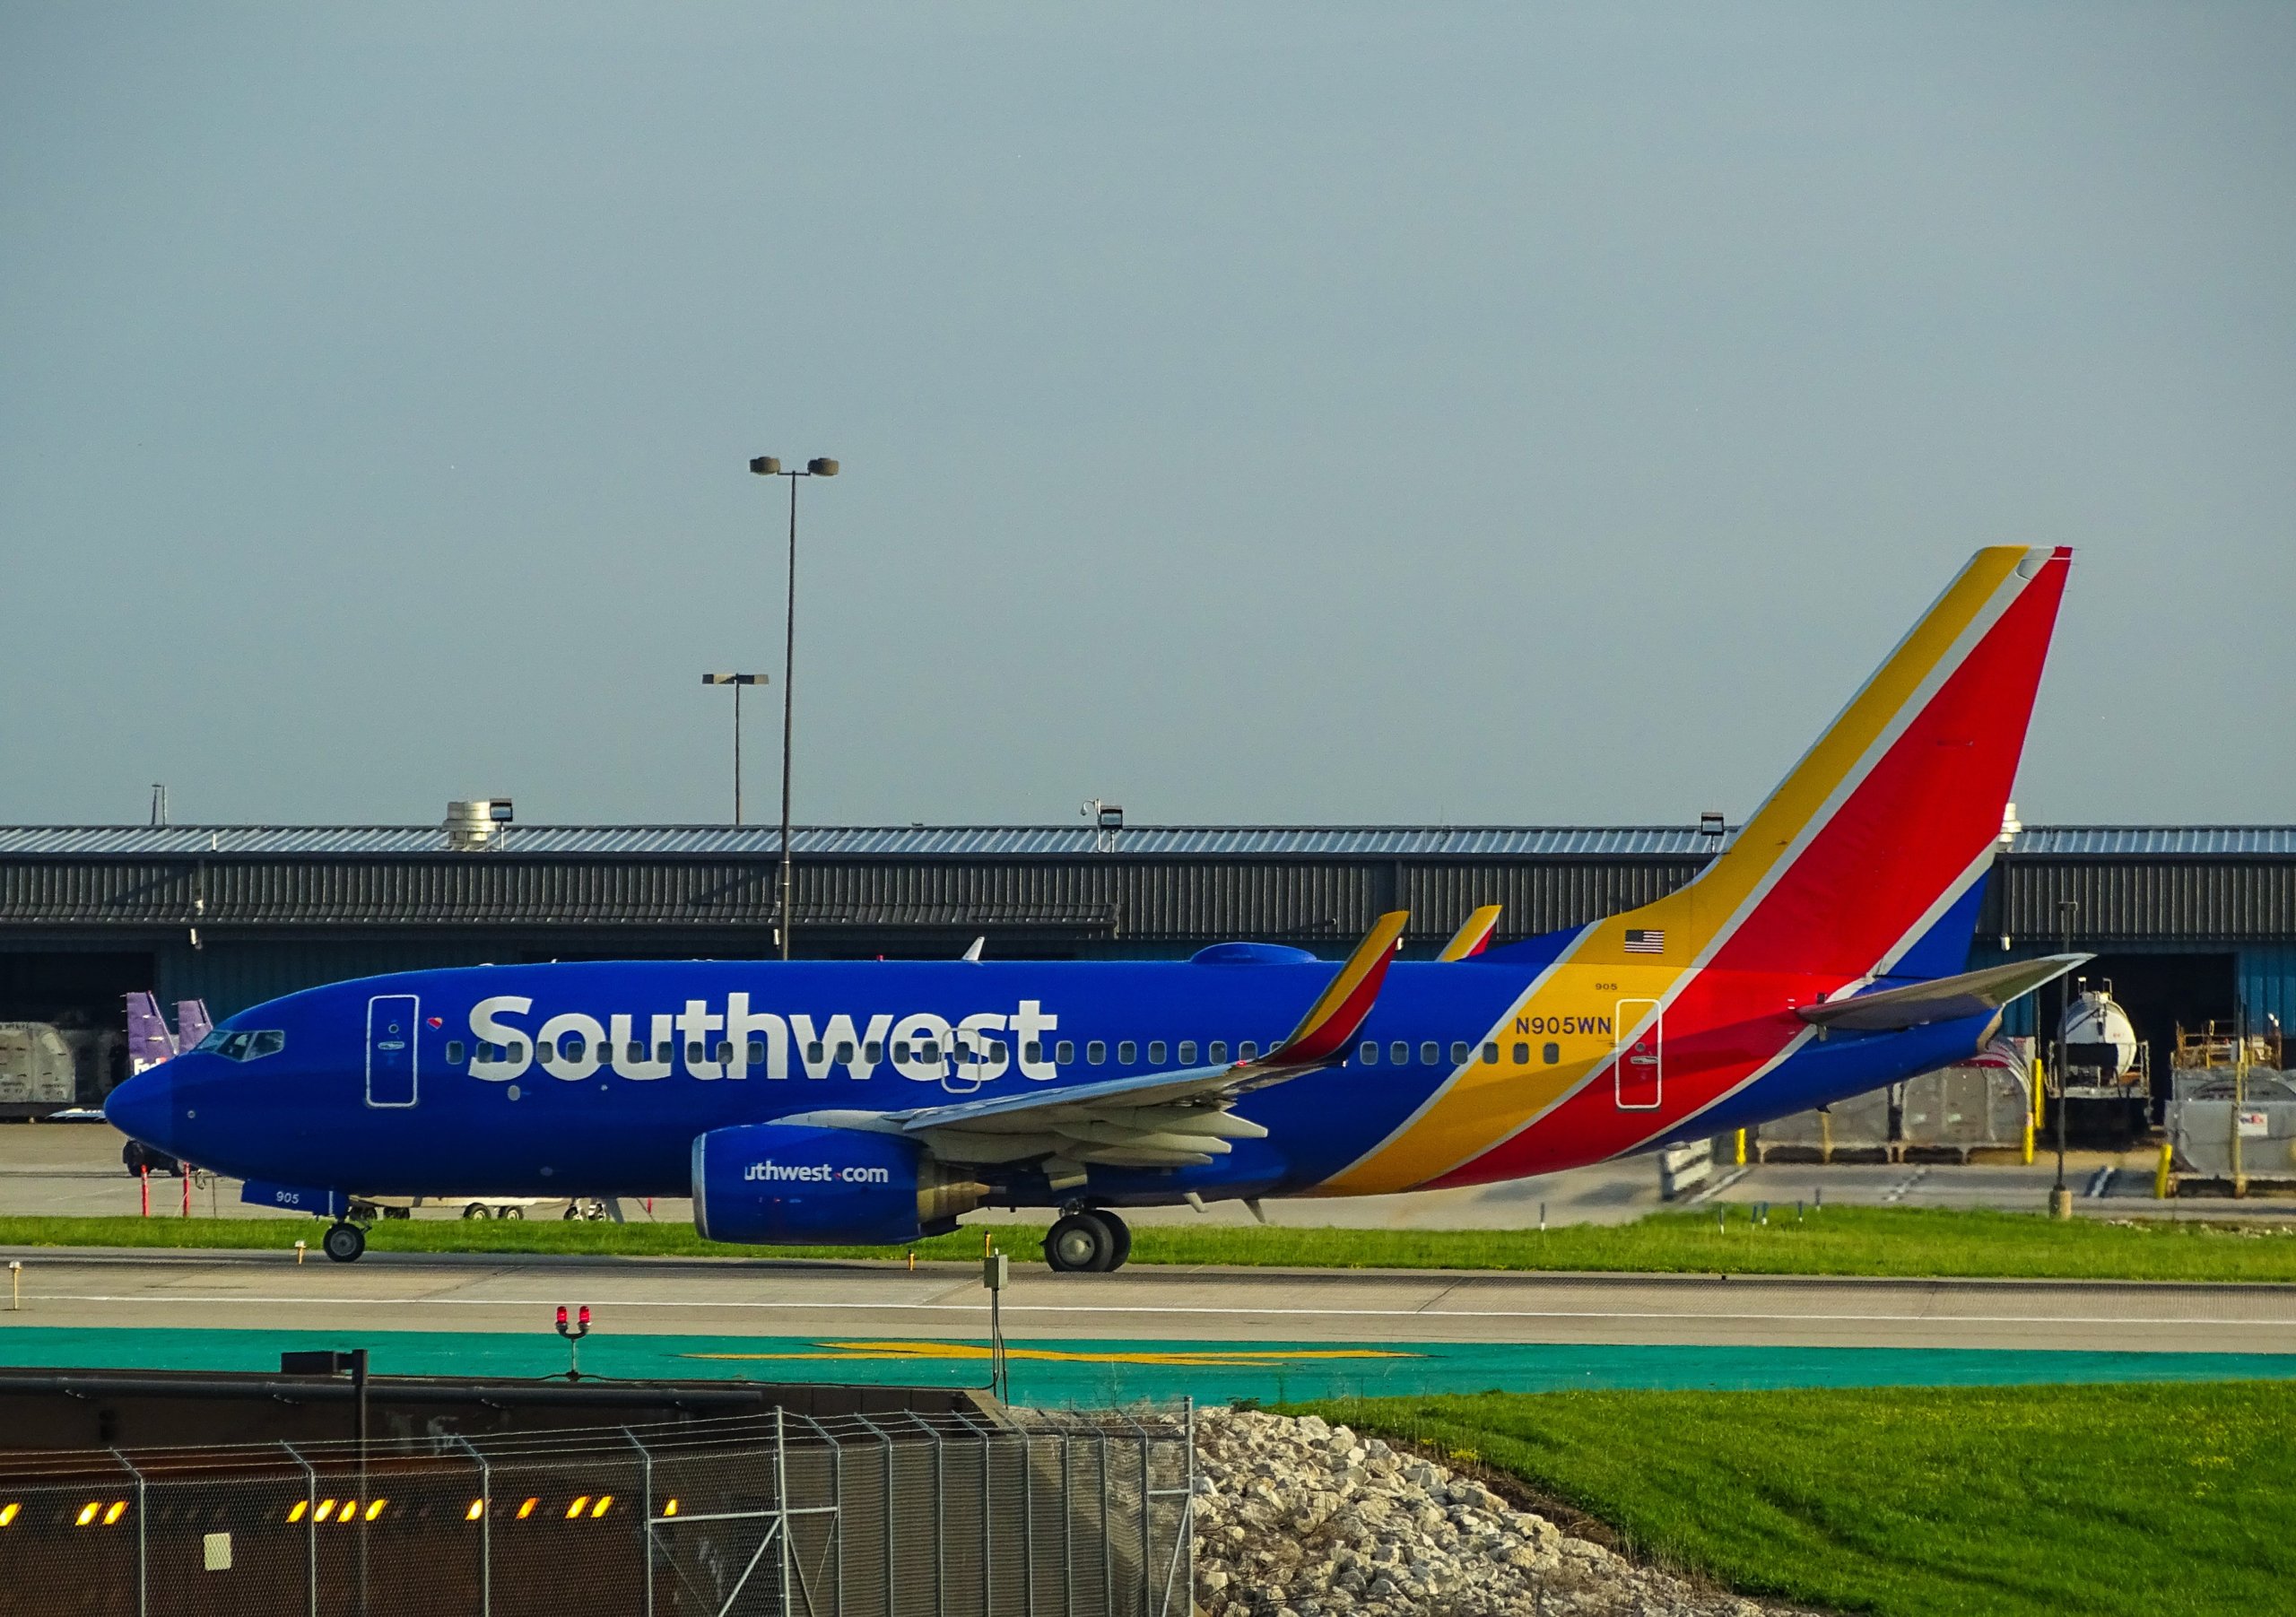 Blue, yellow, and red airplane